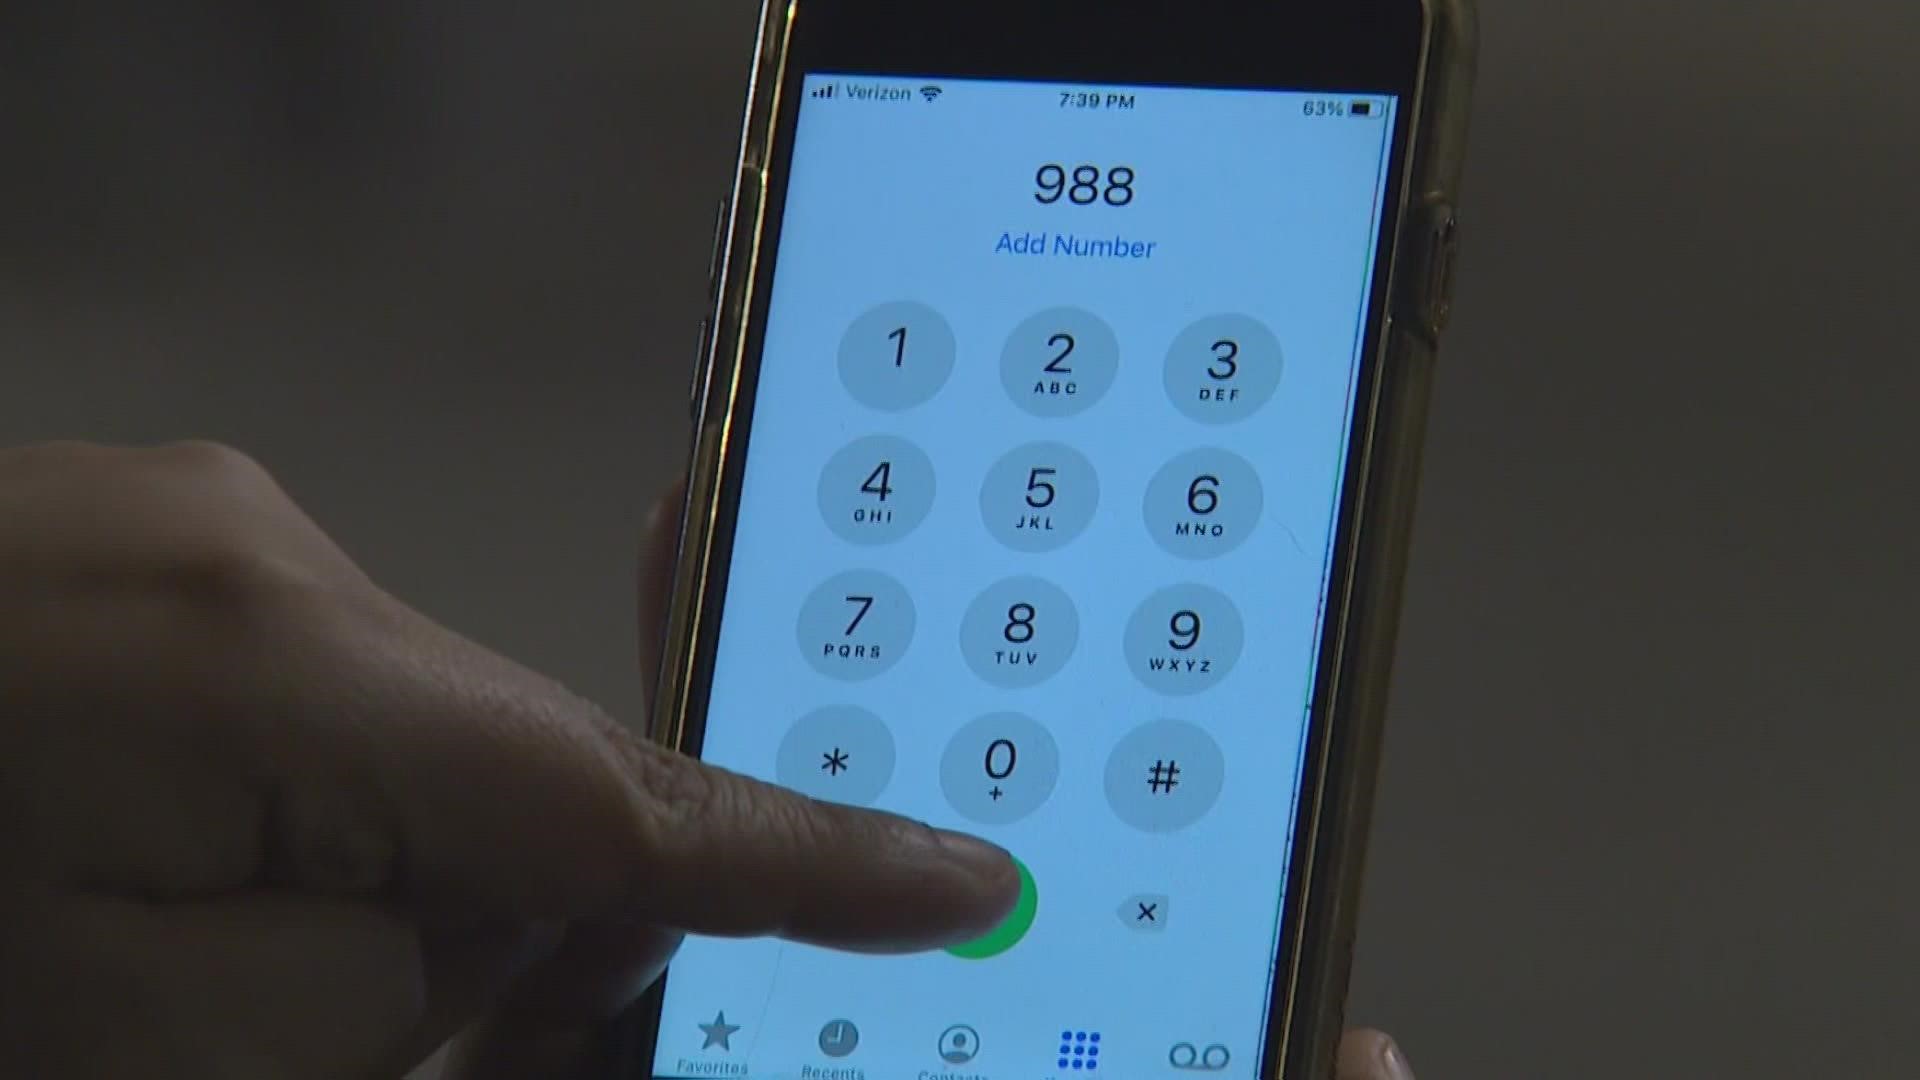 Area codes now also will be required on all calls in Washington state.